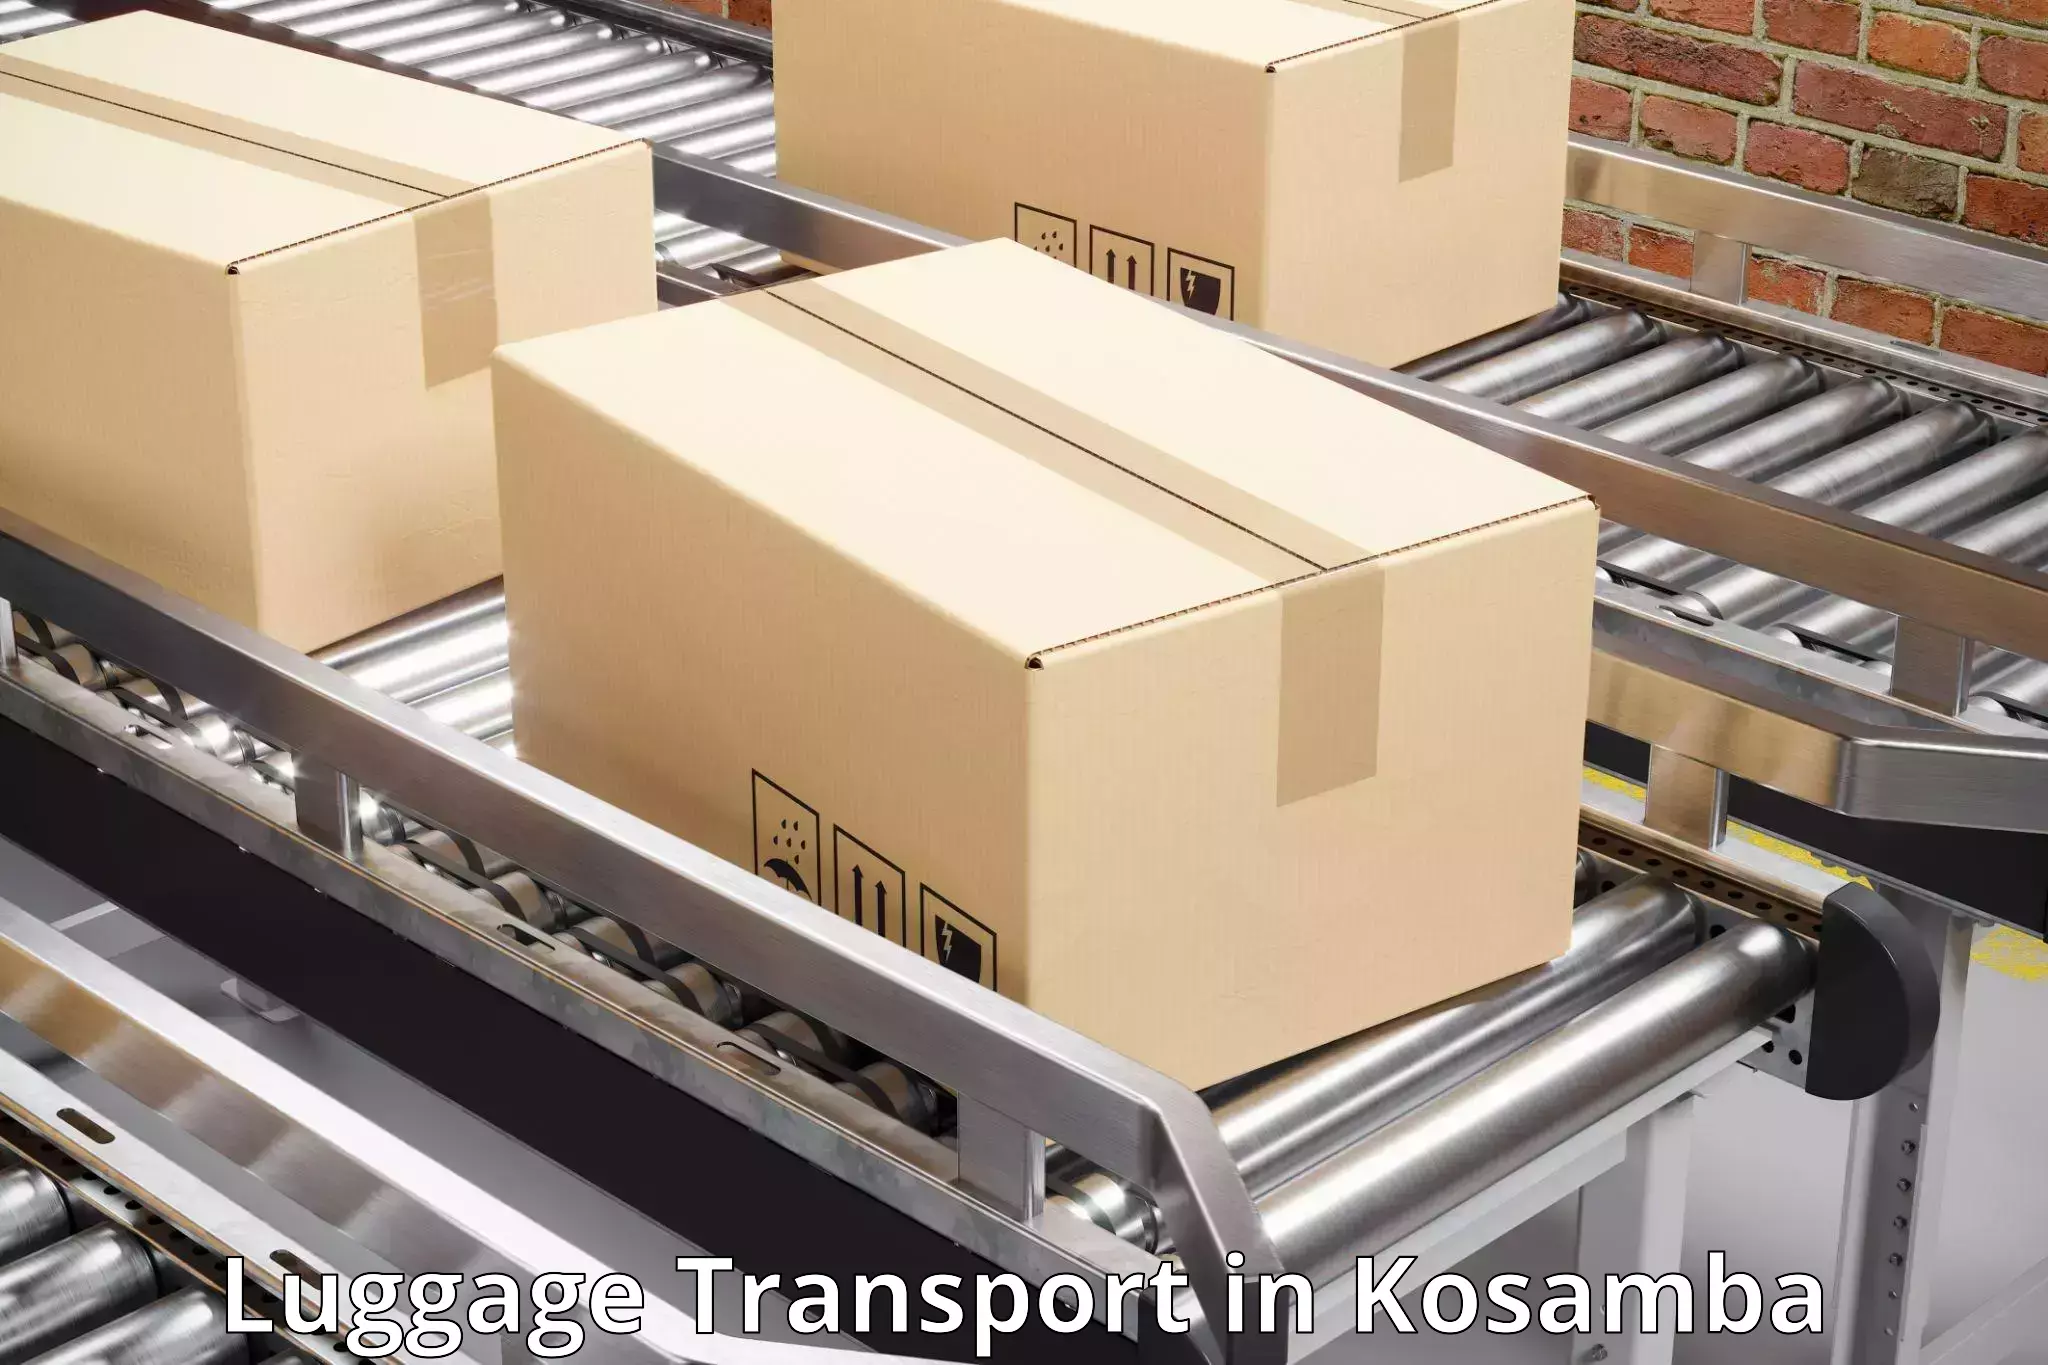 Baggage delivery scheduling in Kosamba